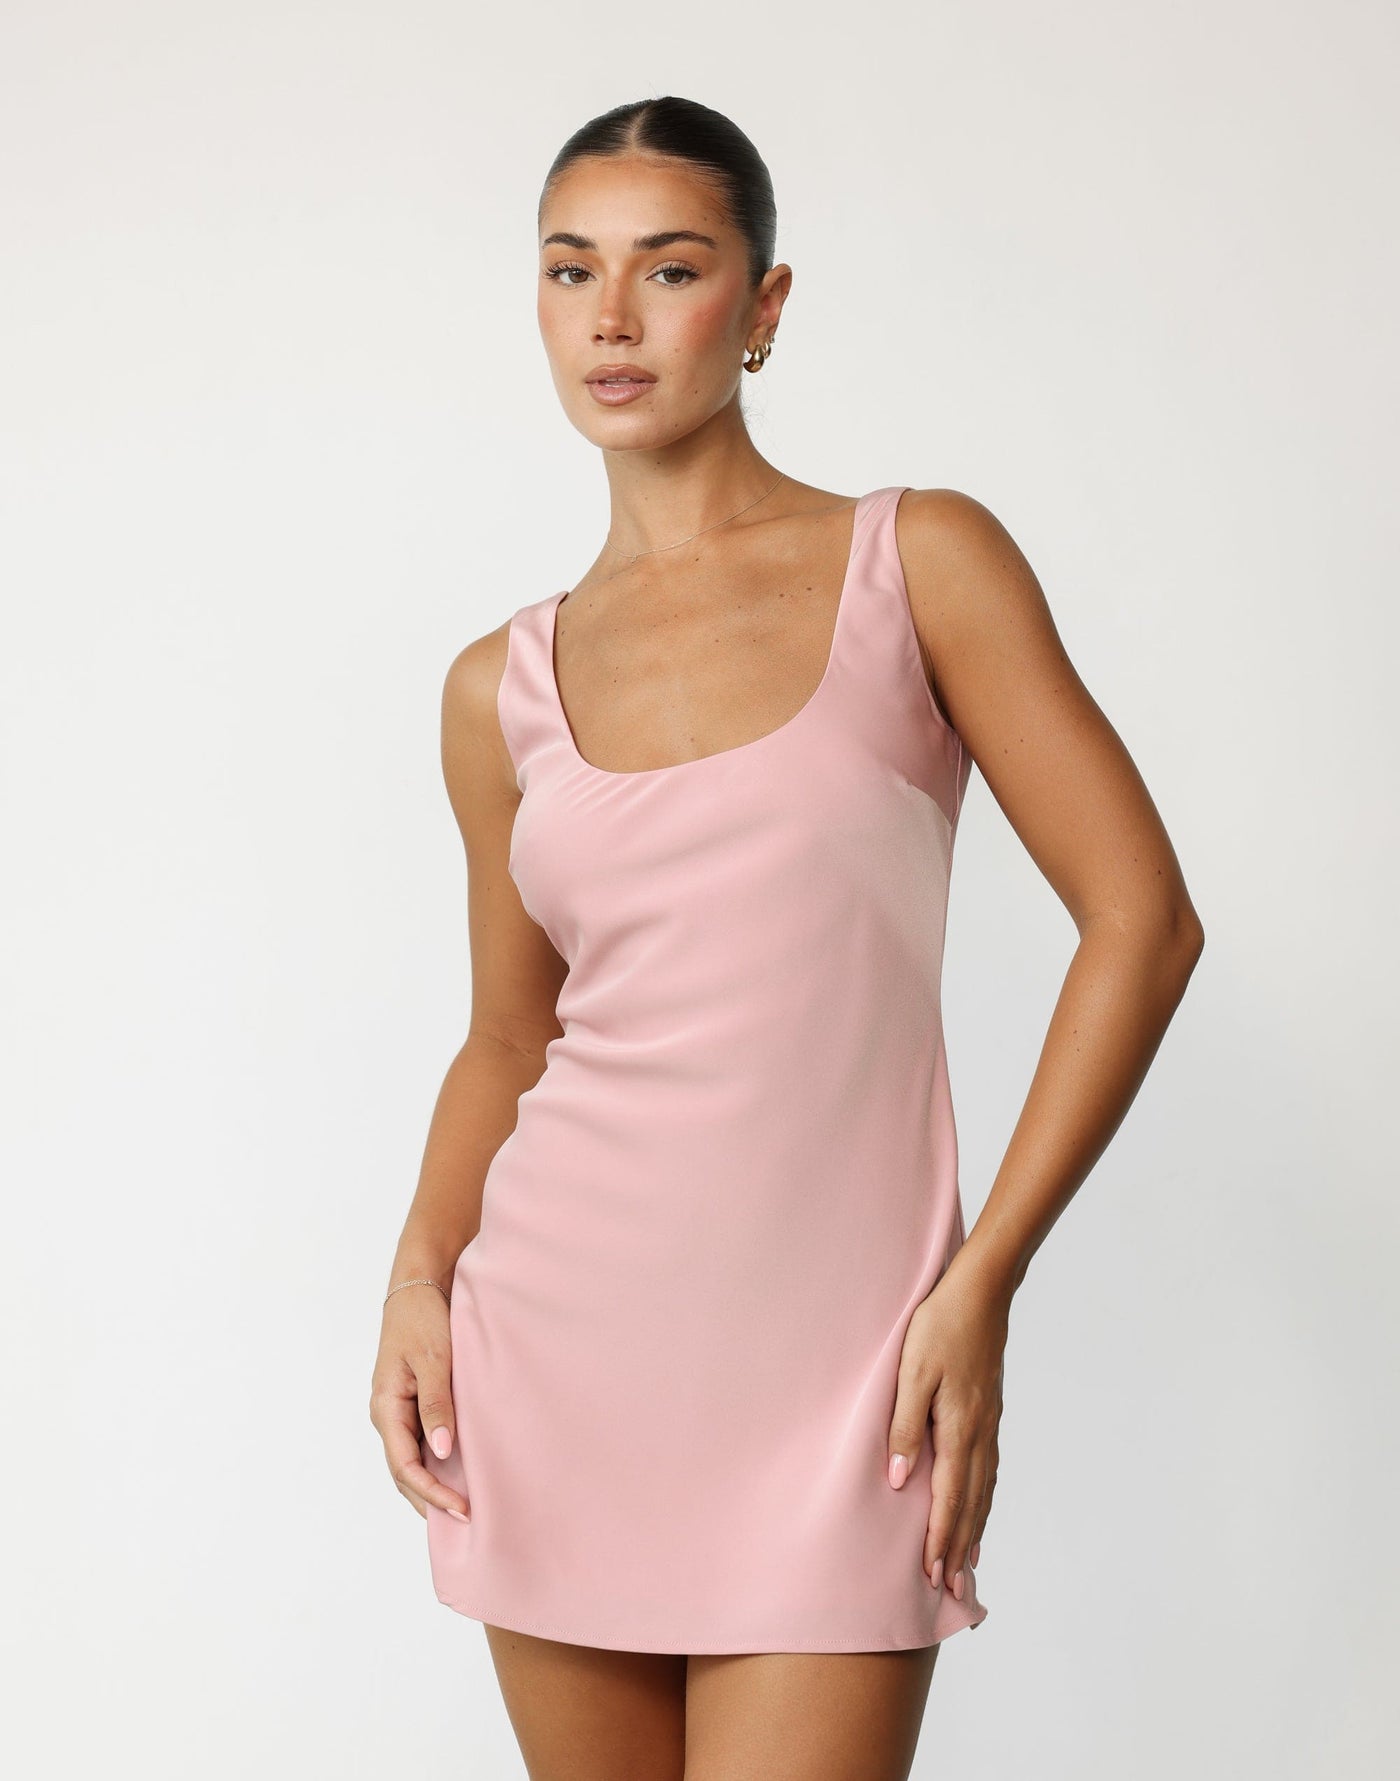 Camillio Mini Dress (Blush) | CHARCOAL Exclusive - High Round Neckline and Scoop Back Satin Mini - Women's Dress - Charcoal Clothing